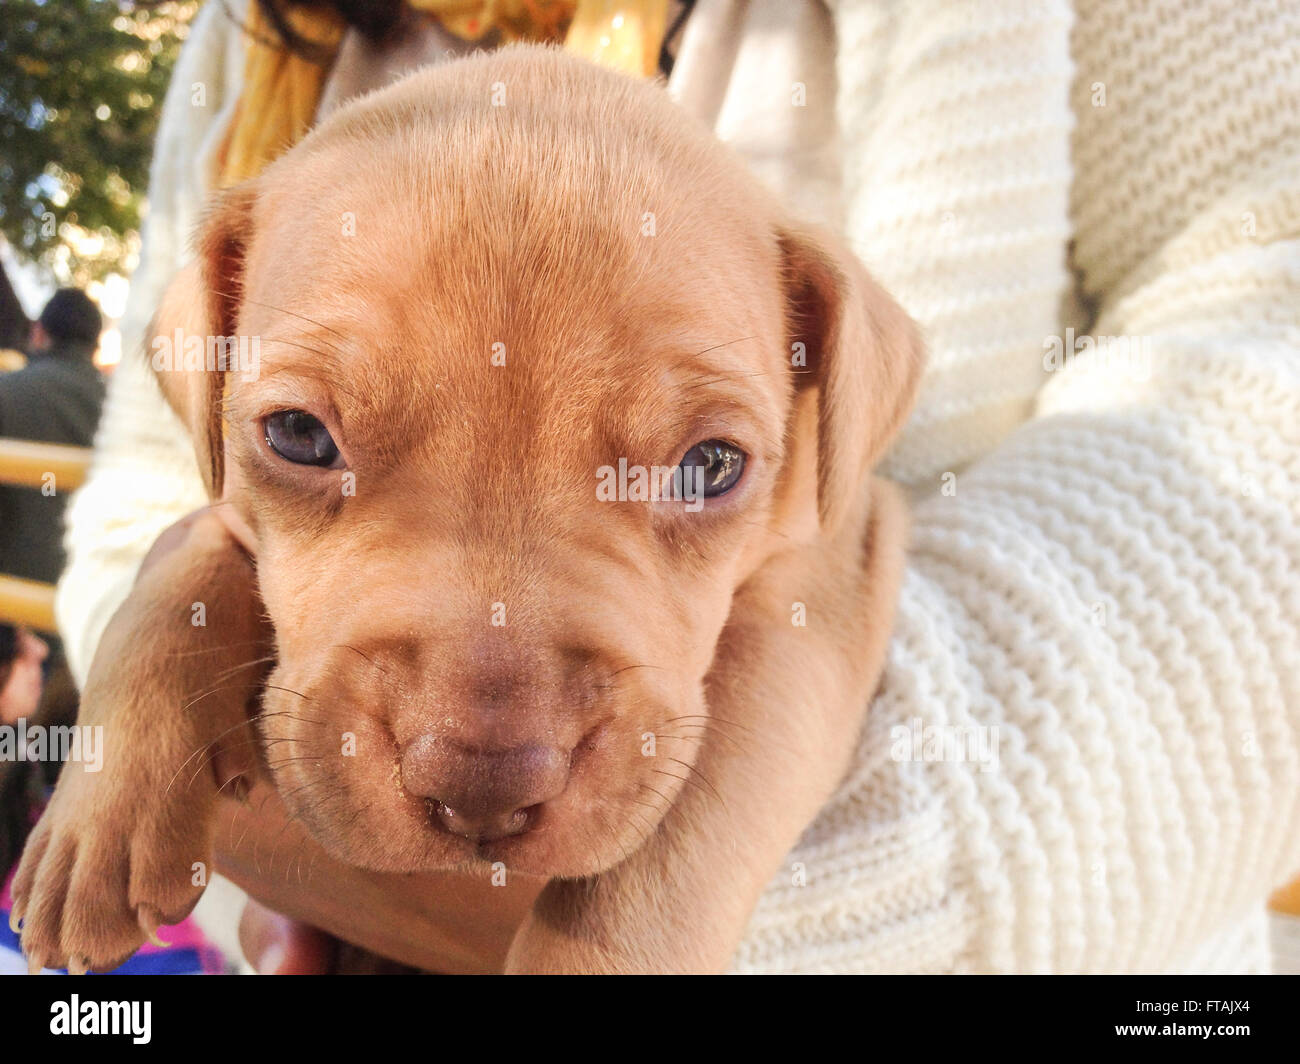 Puppy dog in his breeder's arms looking into the camera. Outdoors portrait Stock Photo